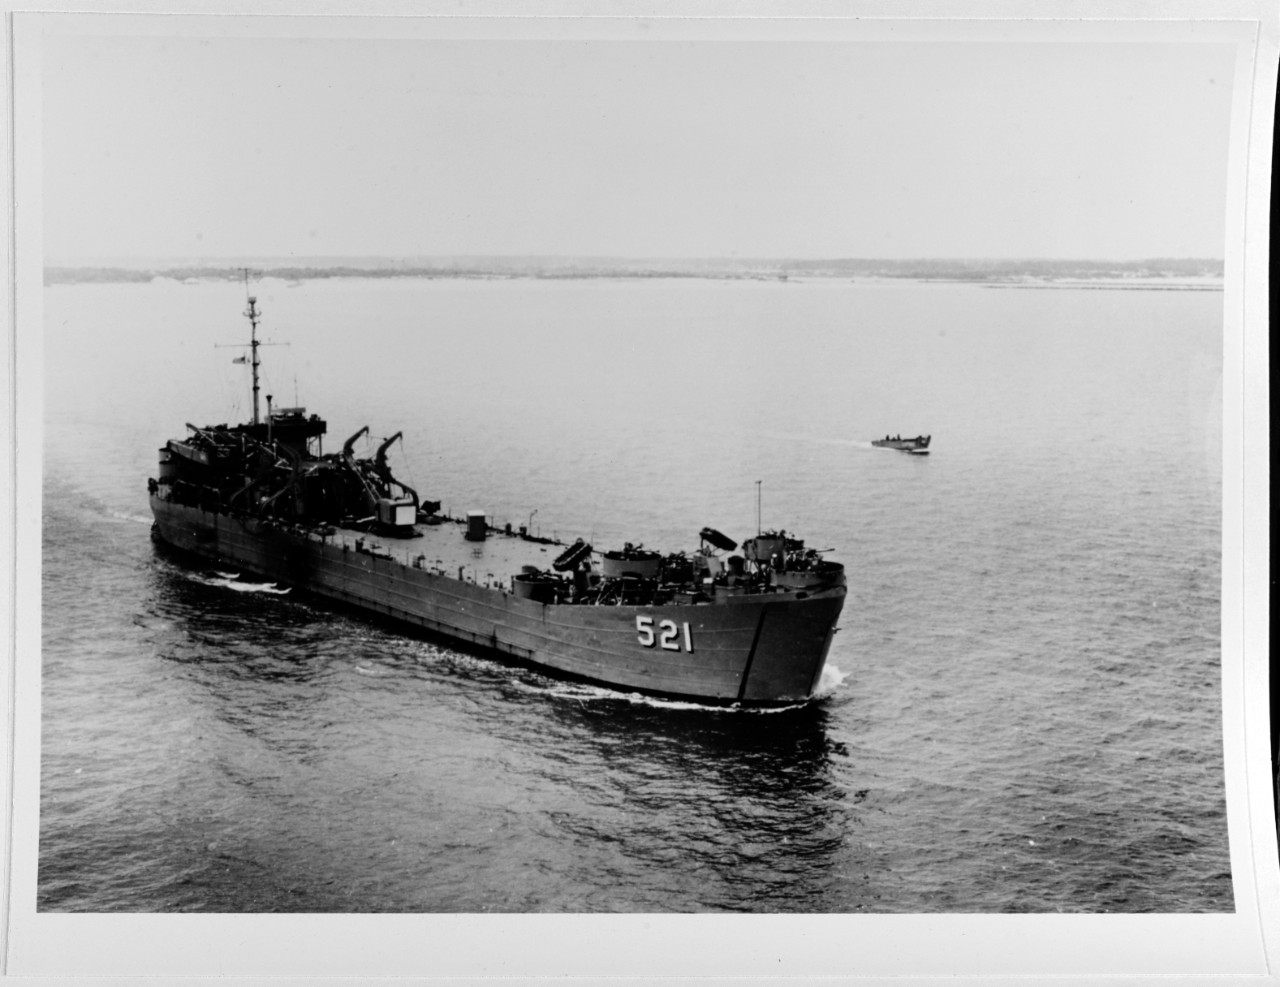 USS CAPE MAY COUNTY (LST-521)